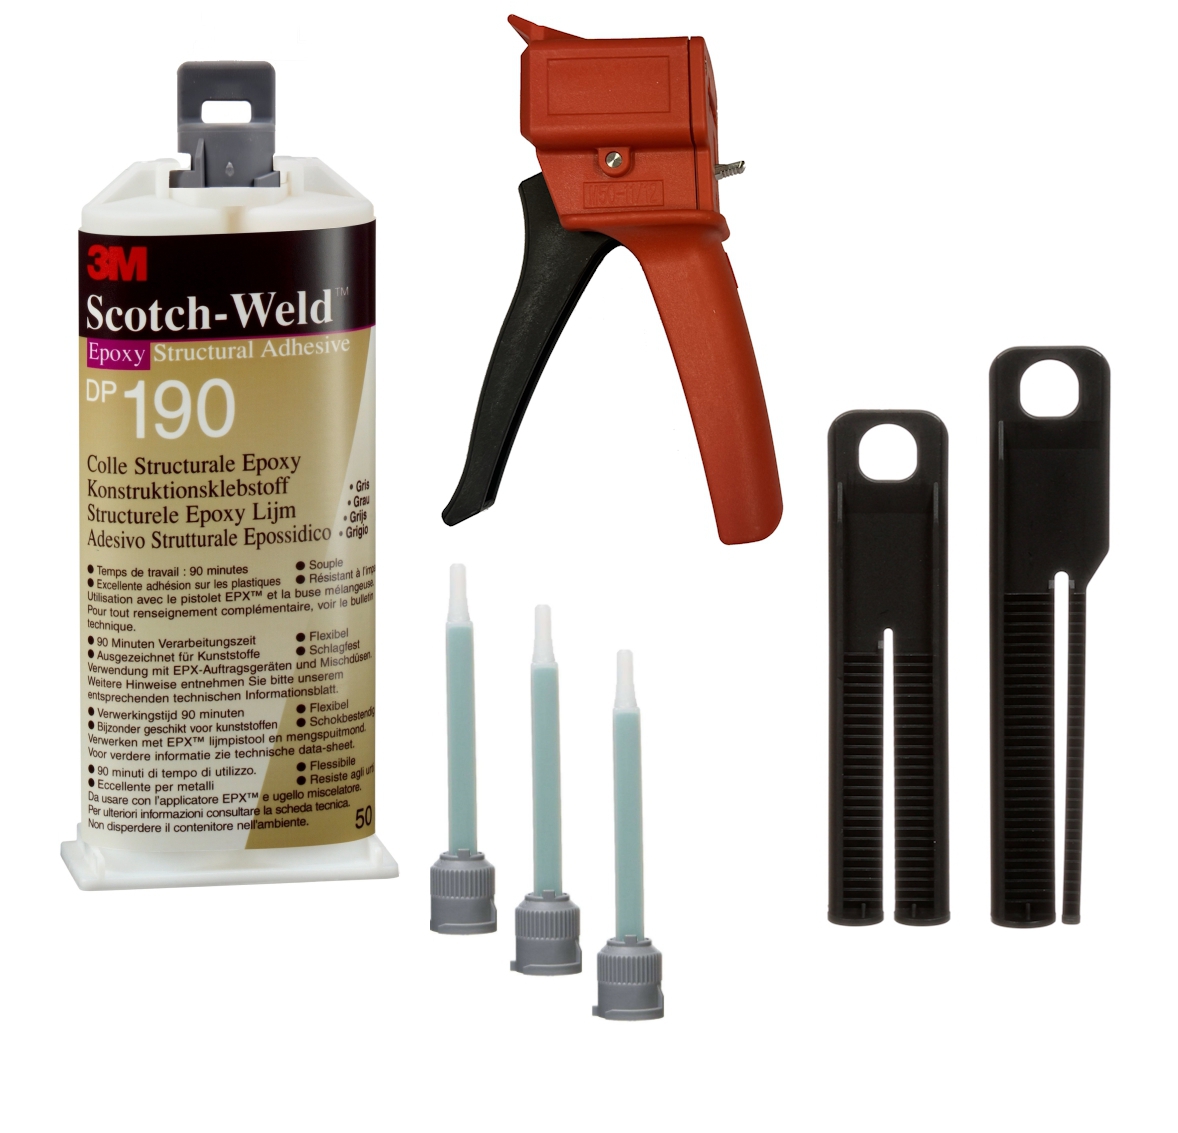 Starter set: 1x 3M Scotch-Weld 2-component construction adhesive EPX System DP190, translucent, 48.5ml, 1x S-K-S hand tool for EPX 38 to 50ml cartridges incl. feed piston 2:1